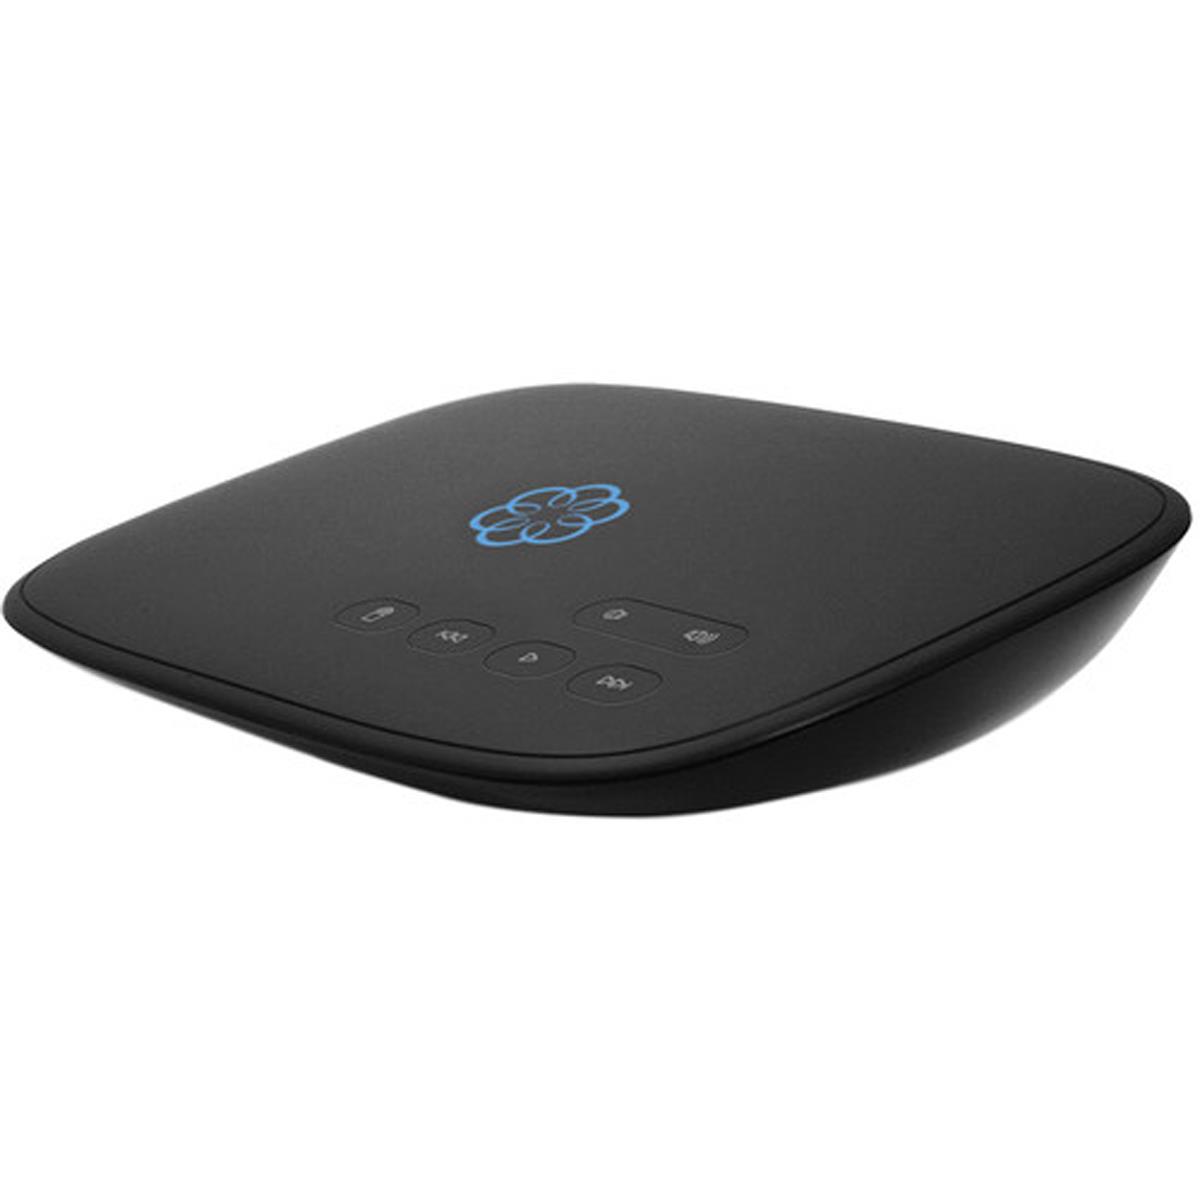 Image of Ooma Telo 2 VoIP Phone System